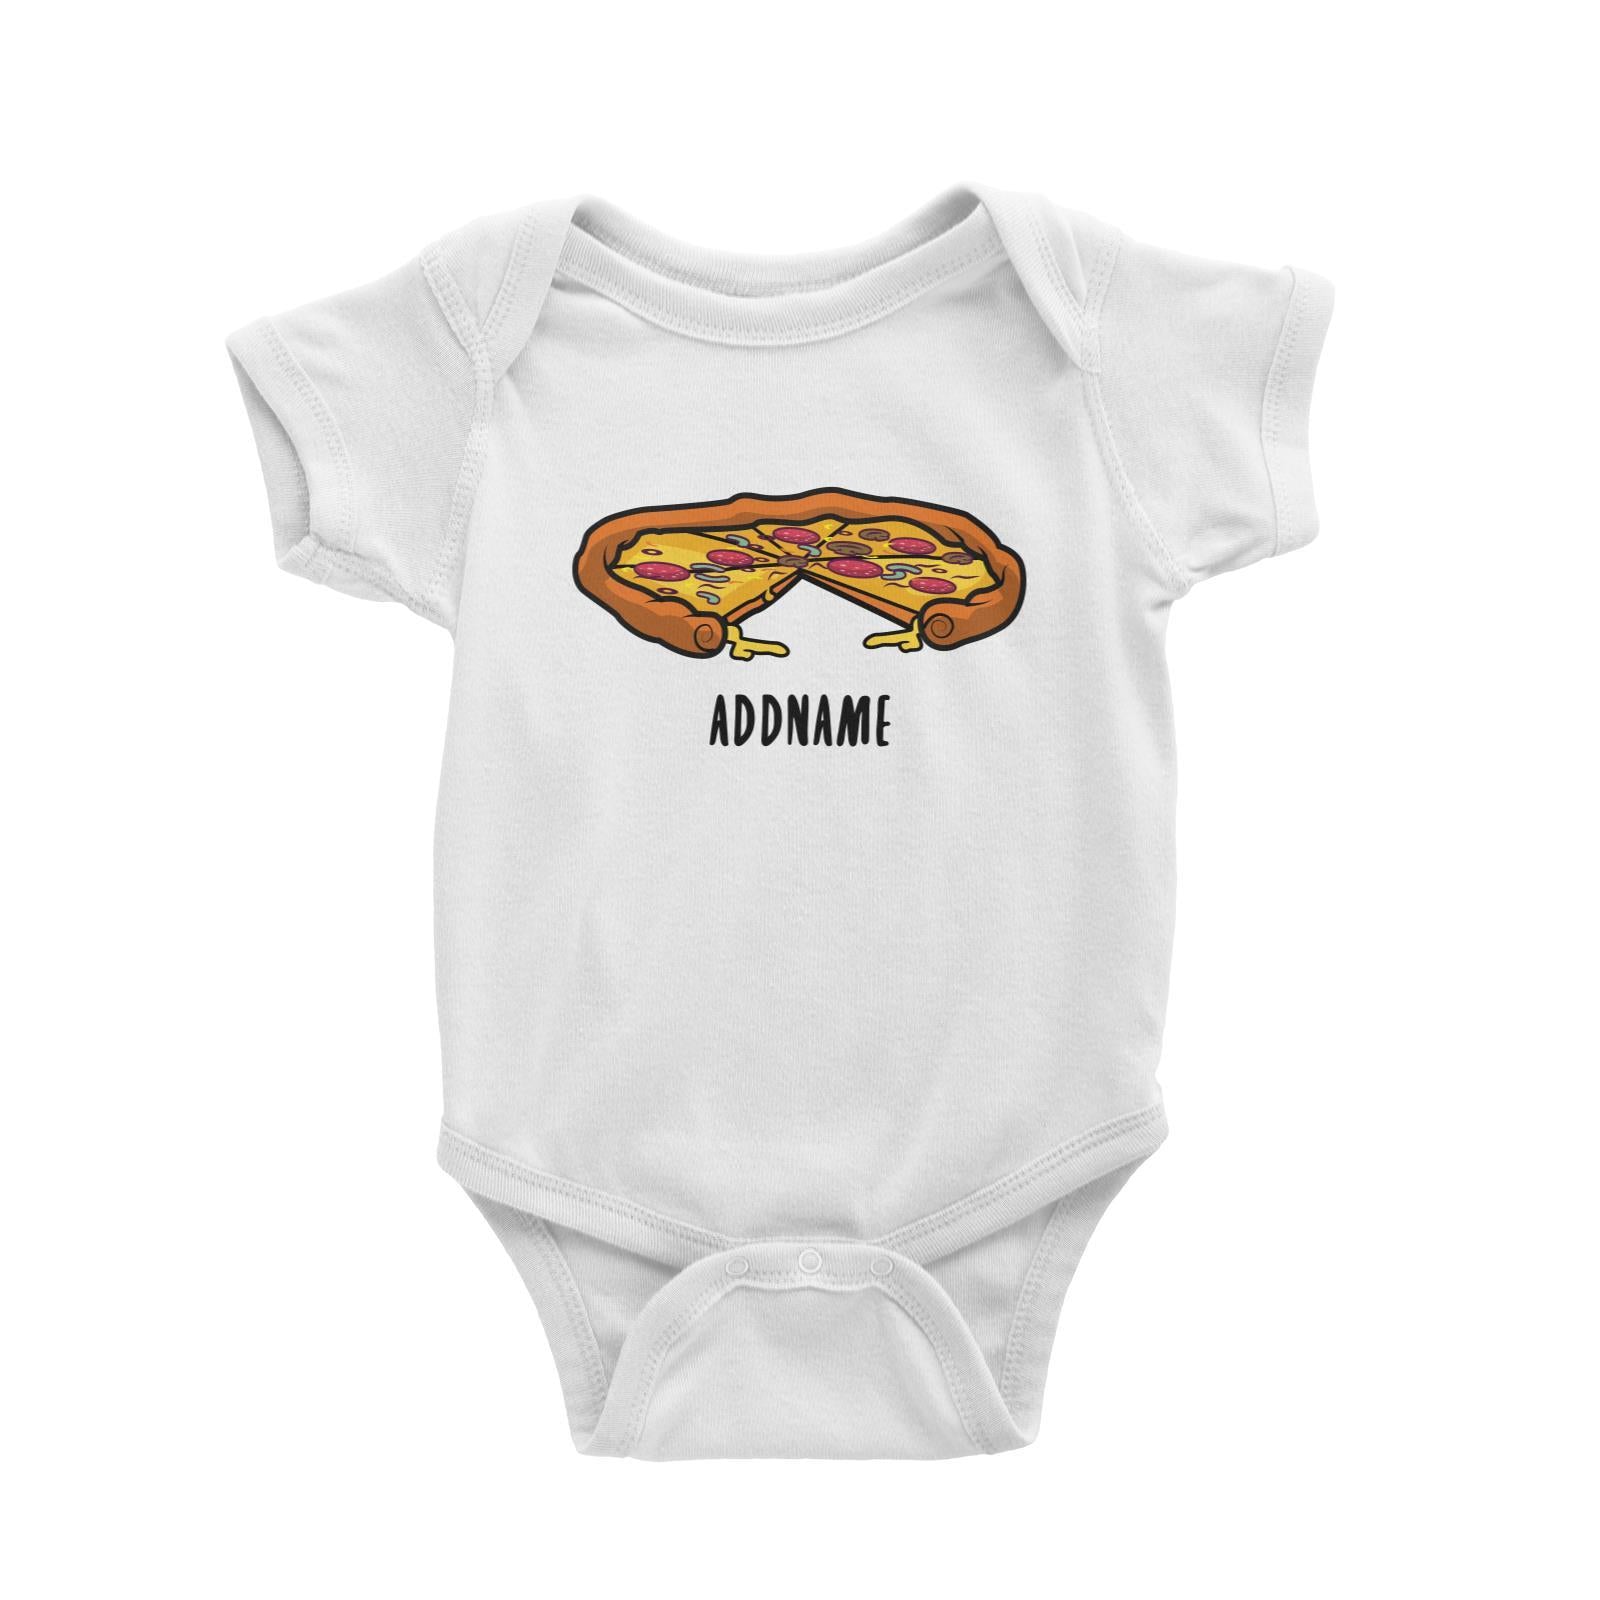 Fast Food Whole Pizza with A Slice Taken Out Addname Baby Romper  Matching Family Comic Cartoon Personalizable Designs